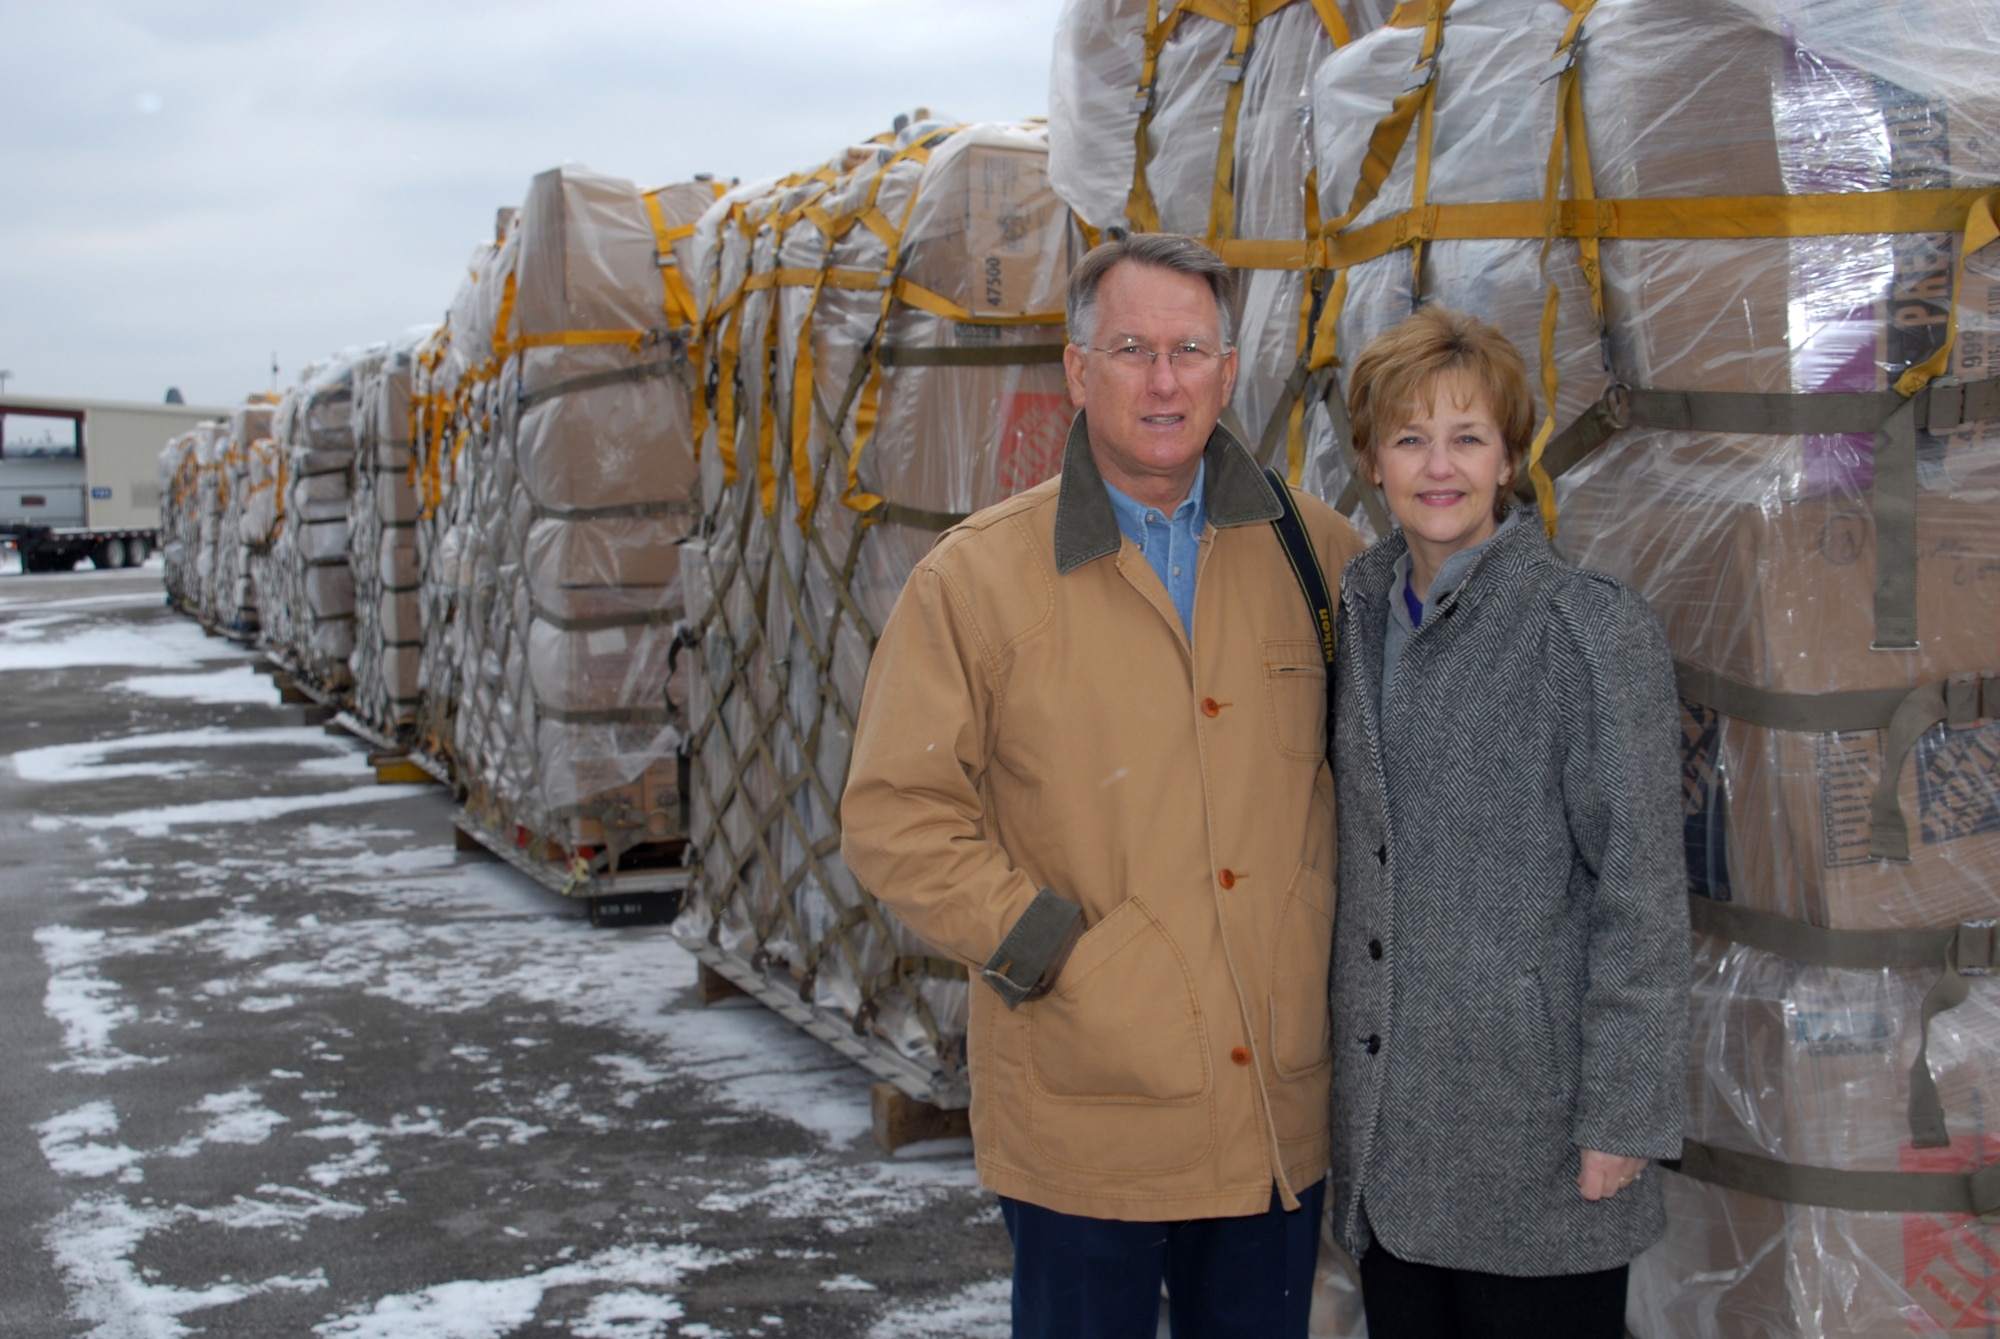 Retired Lt. Gen. John Bradley and wife Jan, who founded the Lamia Afghan Foundation, stand by a pallet at the 118th Airlift Wing. The pallets are loaded with humanitarian aid to send to people in Afghanistan. More than 60,000 pounds of aid are to be flown to Afghanistan Mid-January 2010. The foundation cooridinated the loading and delivery of the pallets. 